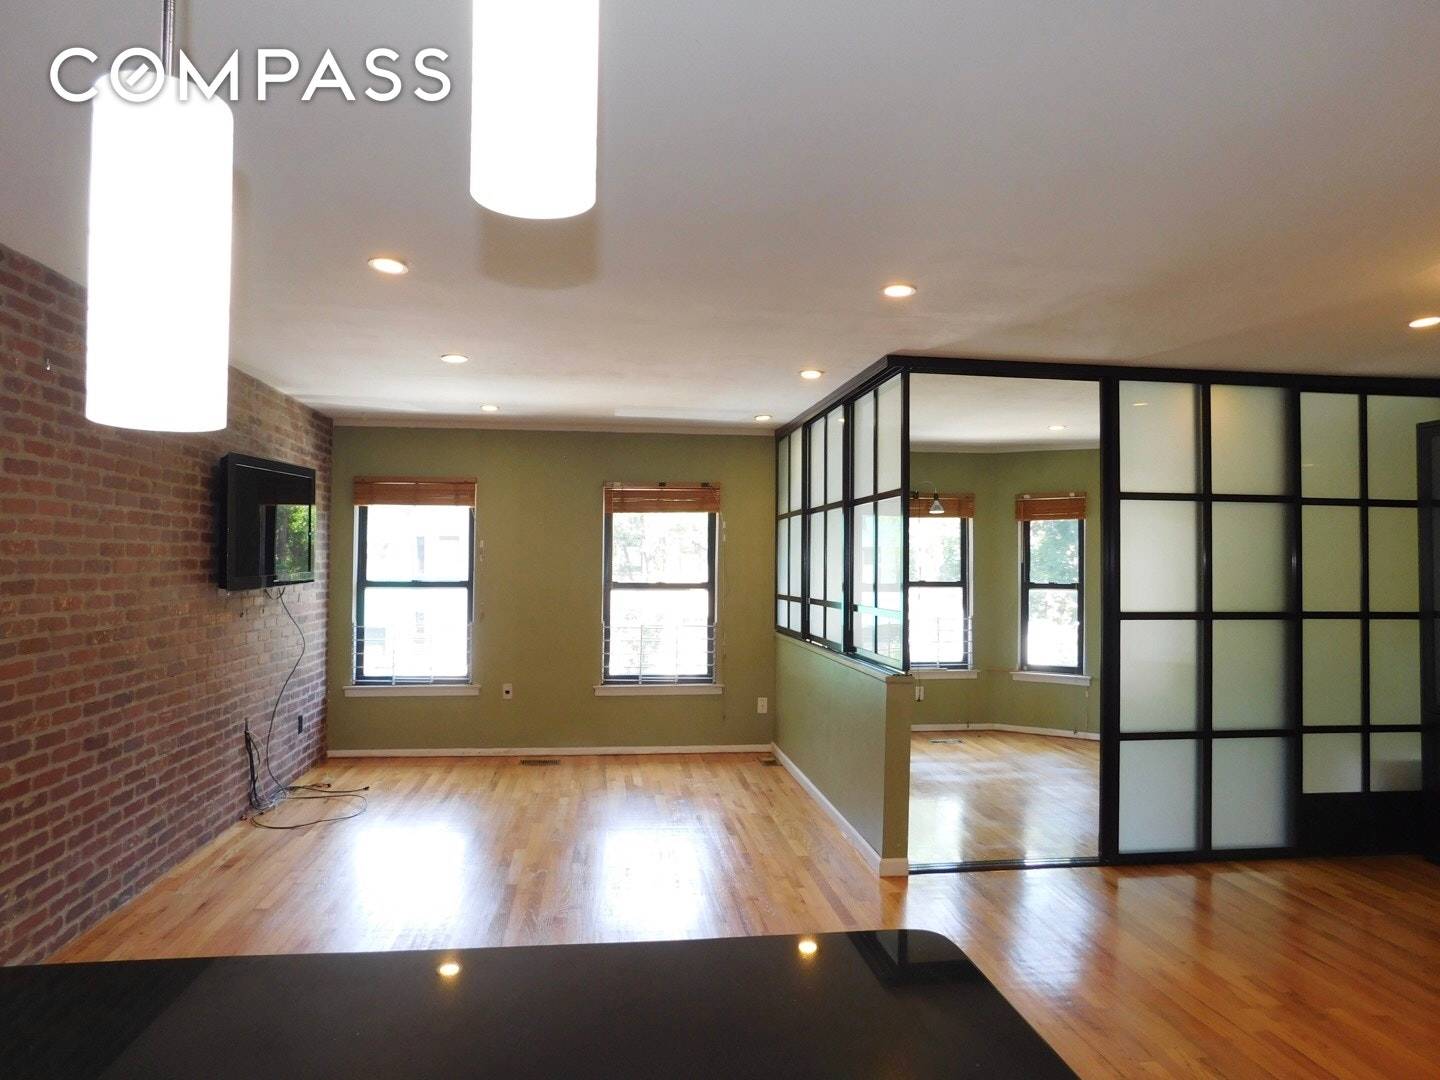 Don't miss this amazing home right in Prime North Park Slope.